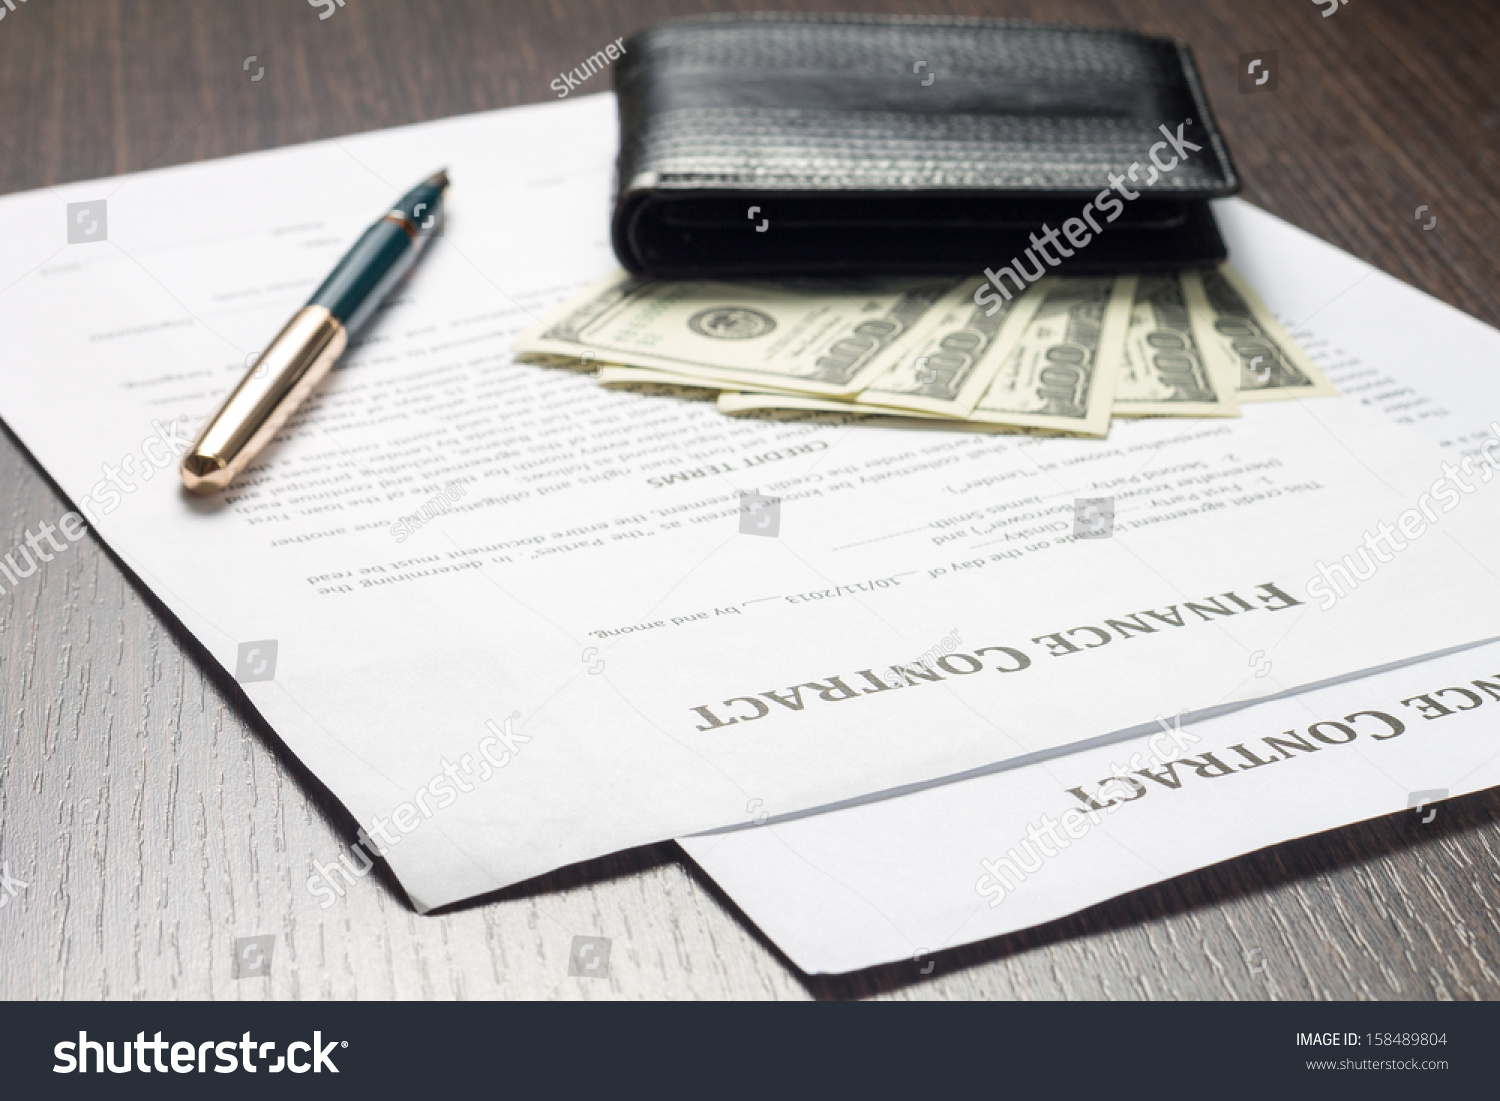 Financial document with wallet, money and fountain pen #158489804